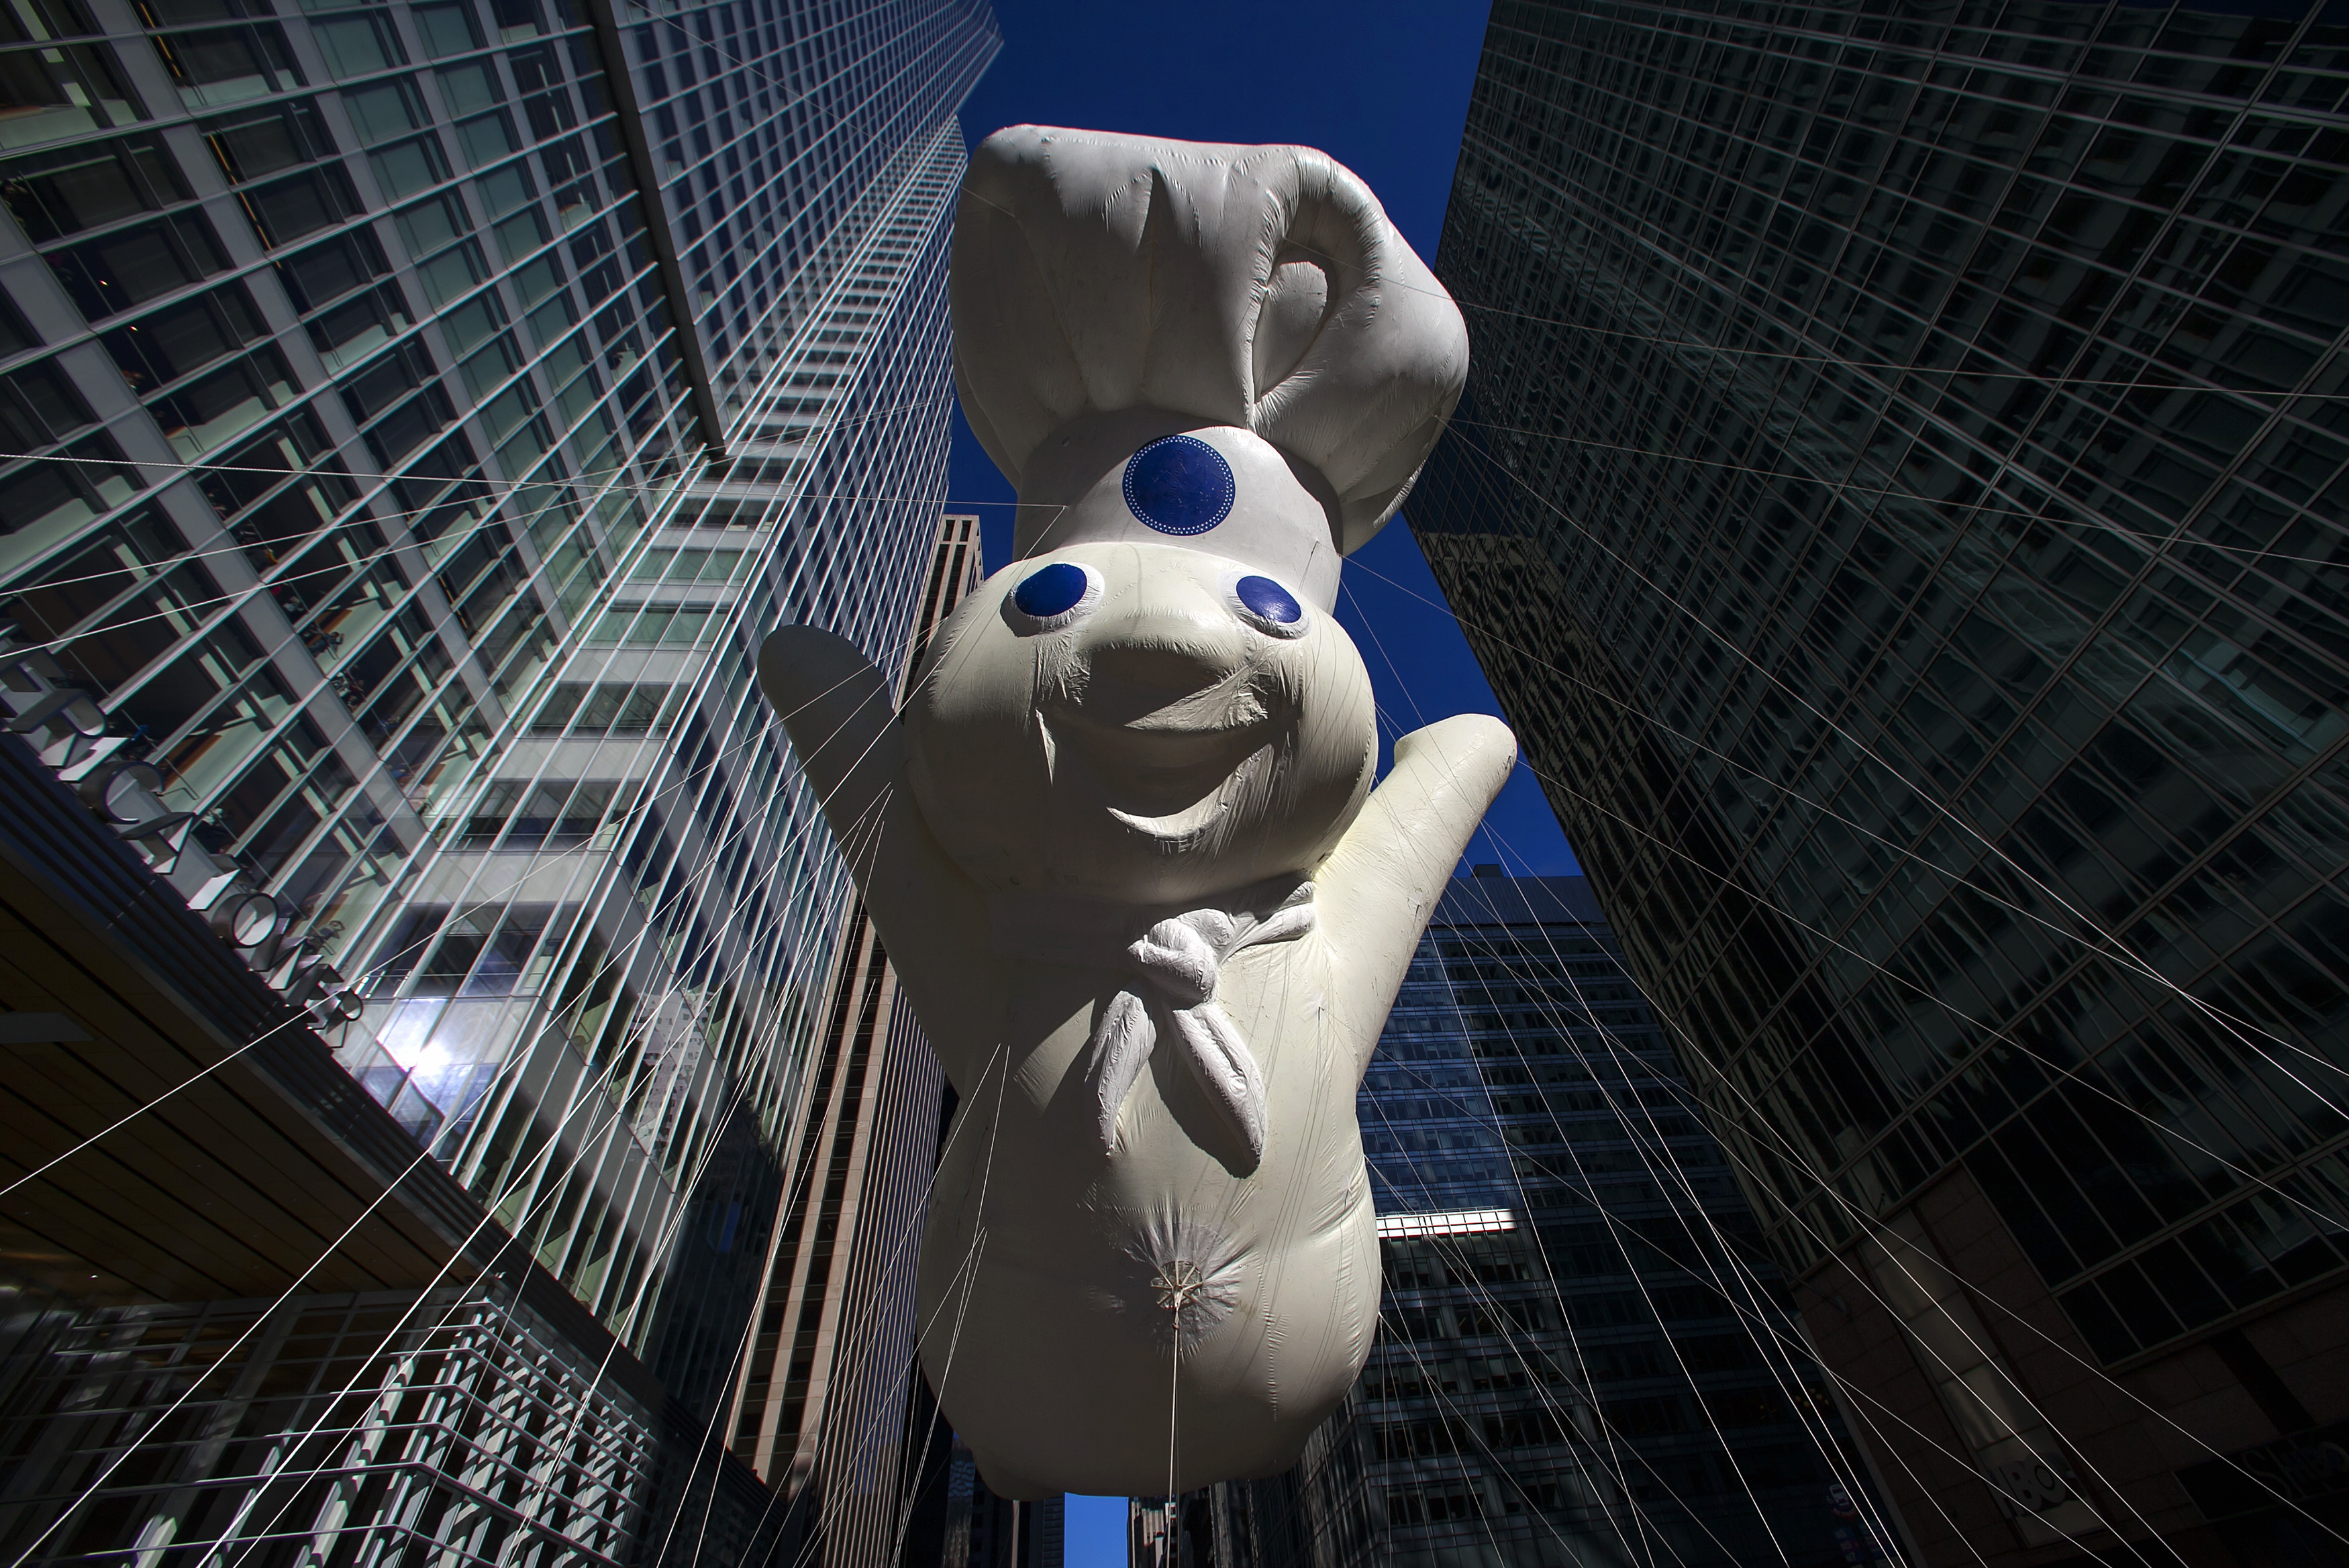 A Pillsbury Doughboy balloon float at the 87th Macy's Thanksgiving Day Parade in New York November 28, 2013 (Eric Thayer—Reuters)